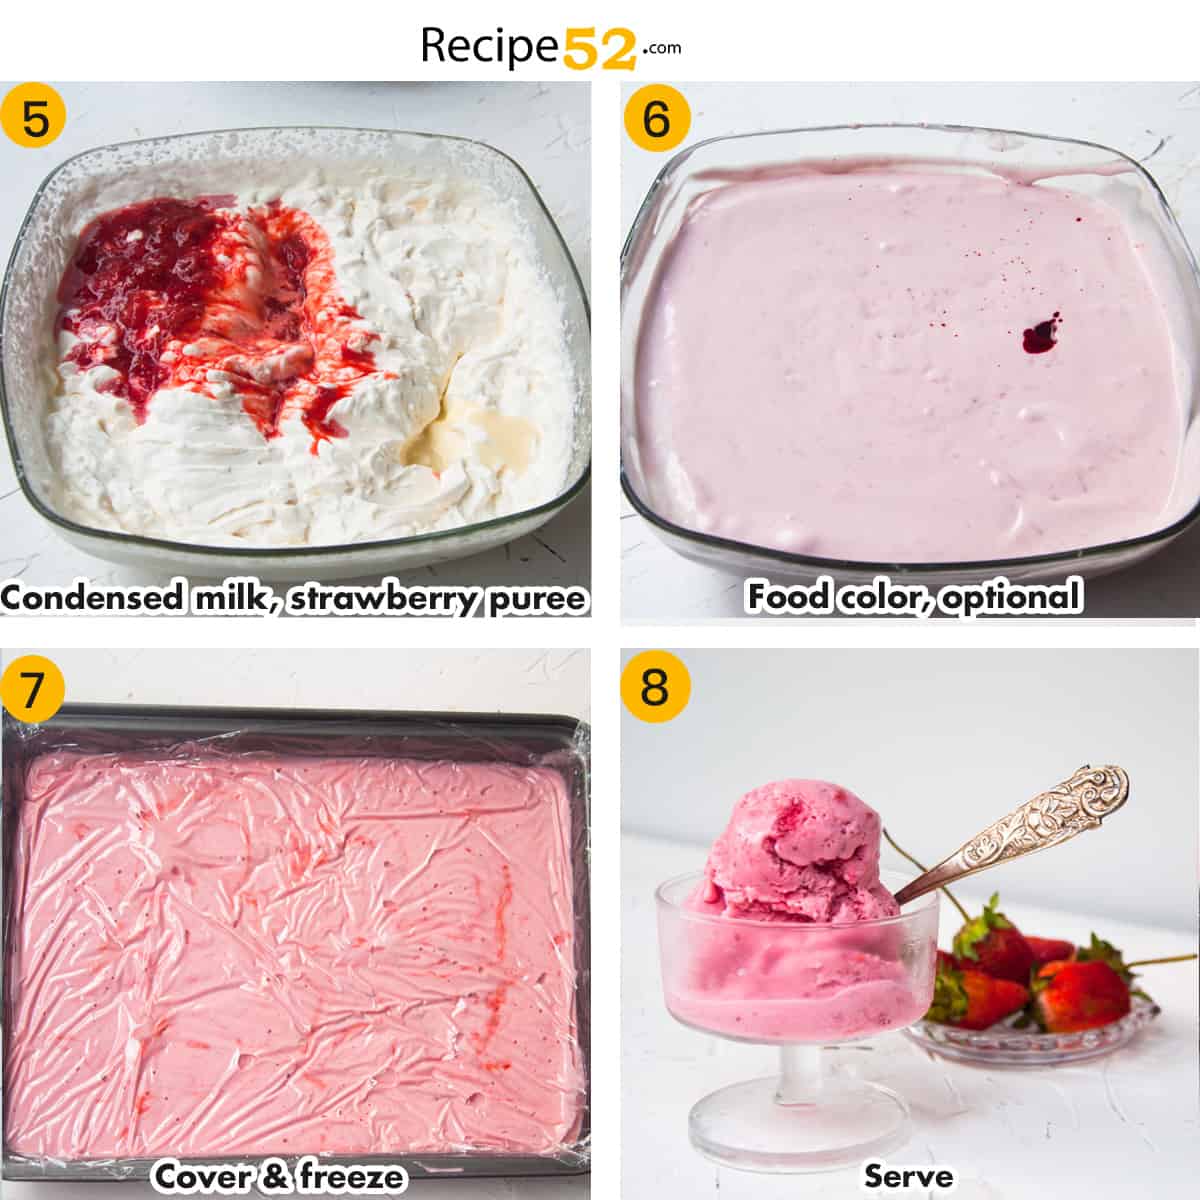 Steps to make ice cfeam and freeze.